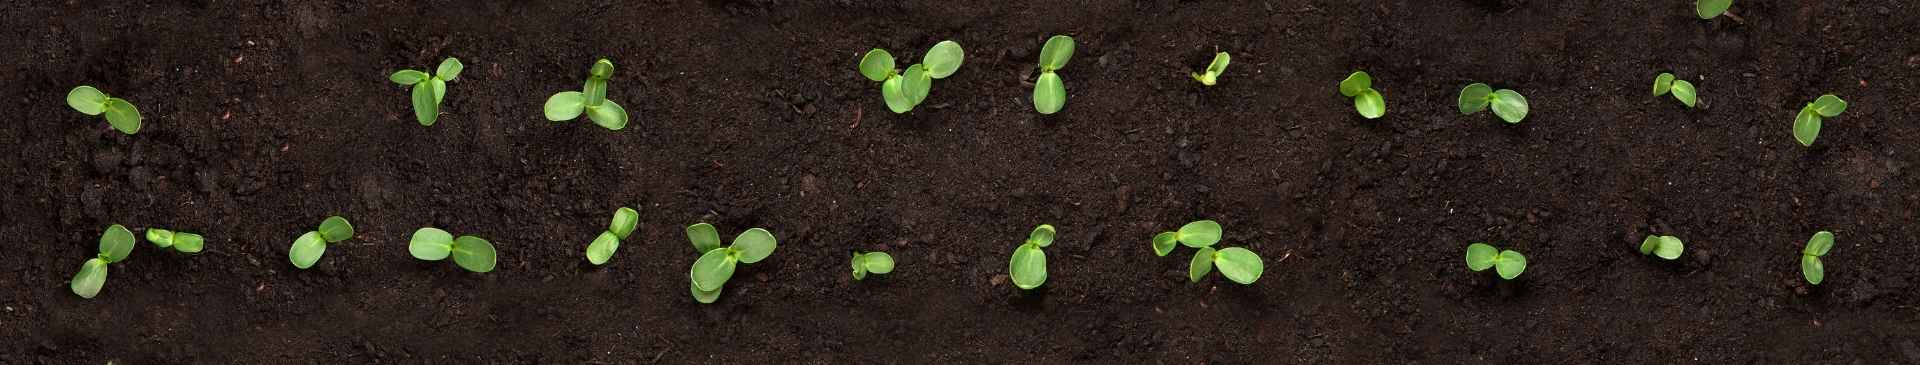 9 Reasons to Raise Your Plants from Seed (and 3 Slight Drawbacks to Bear in Mind)